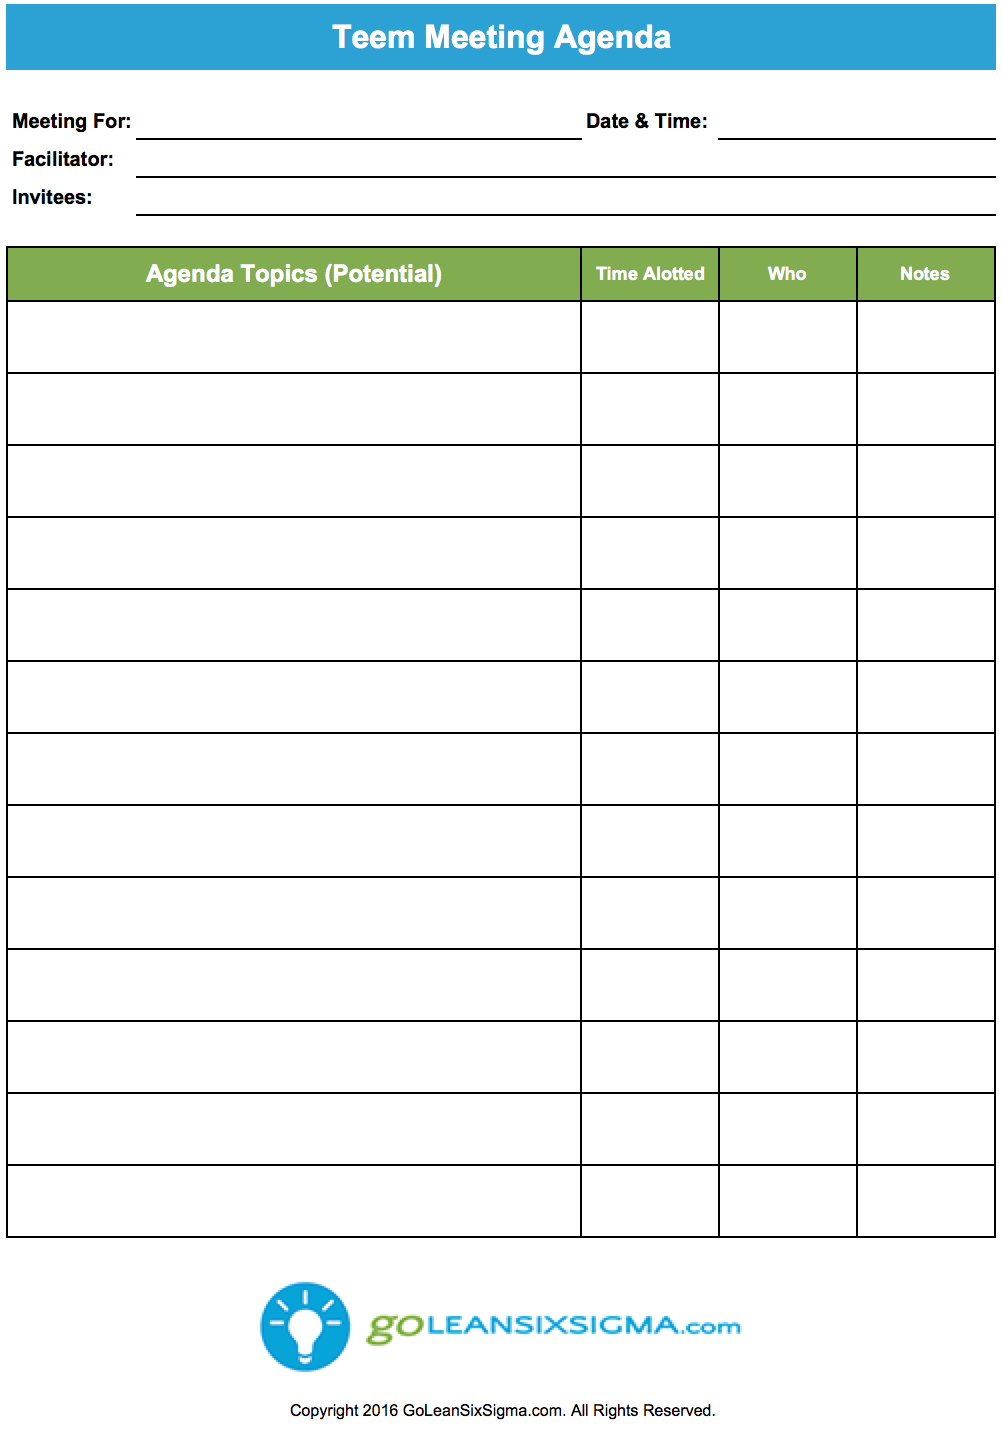 78 How To Create Team Meeting Agenda Template For Ms Word By Team Meeting Agenda Template Cards Design Templates